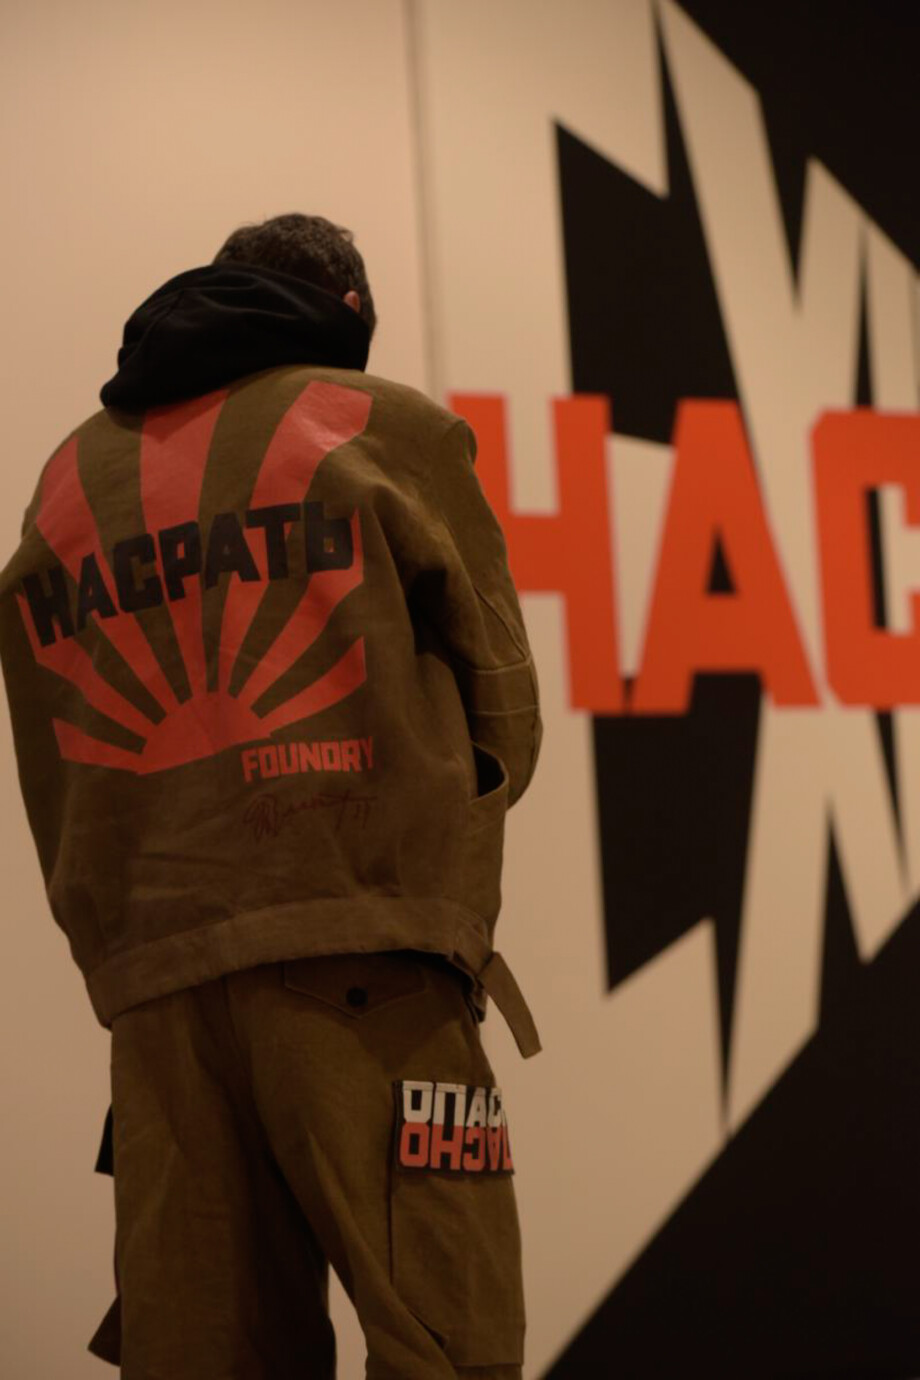 An image of someone wearing a FOUNDRY UNIFORM outfit in-front of an Erik Bulatov Painting. The outfit include a drab green overall emblazoned with artworks by Erik Bulatov, shown as part of Black Horizon BPS22